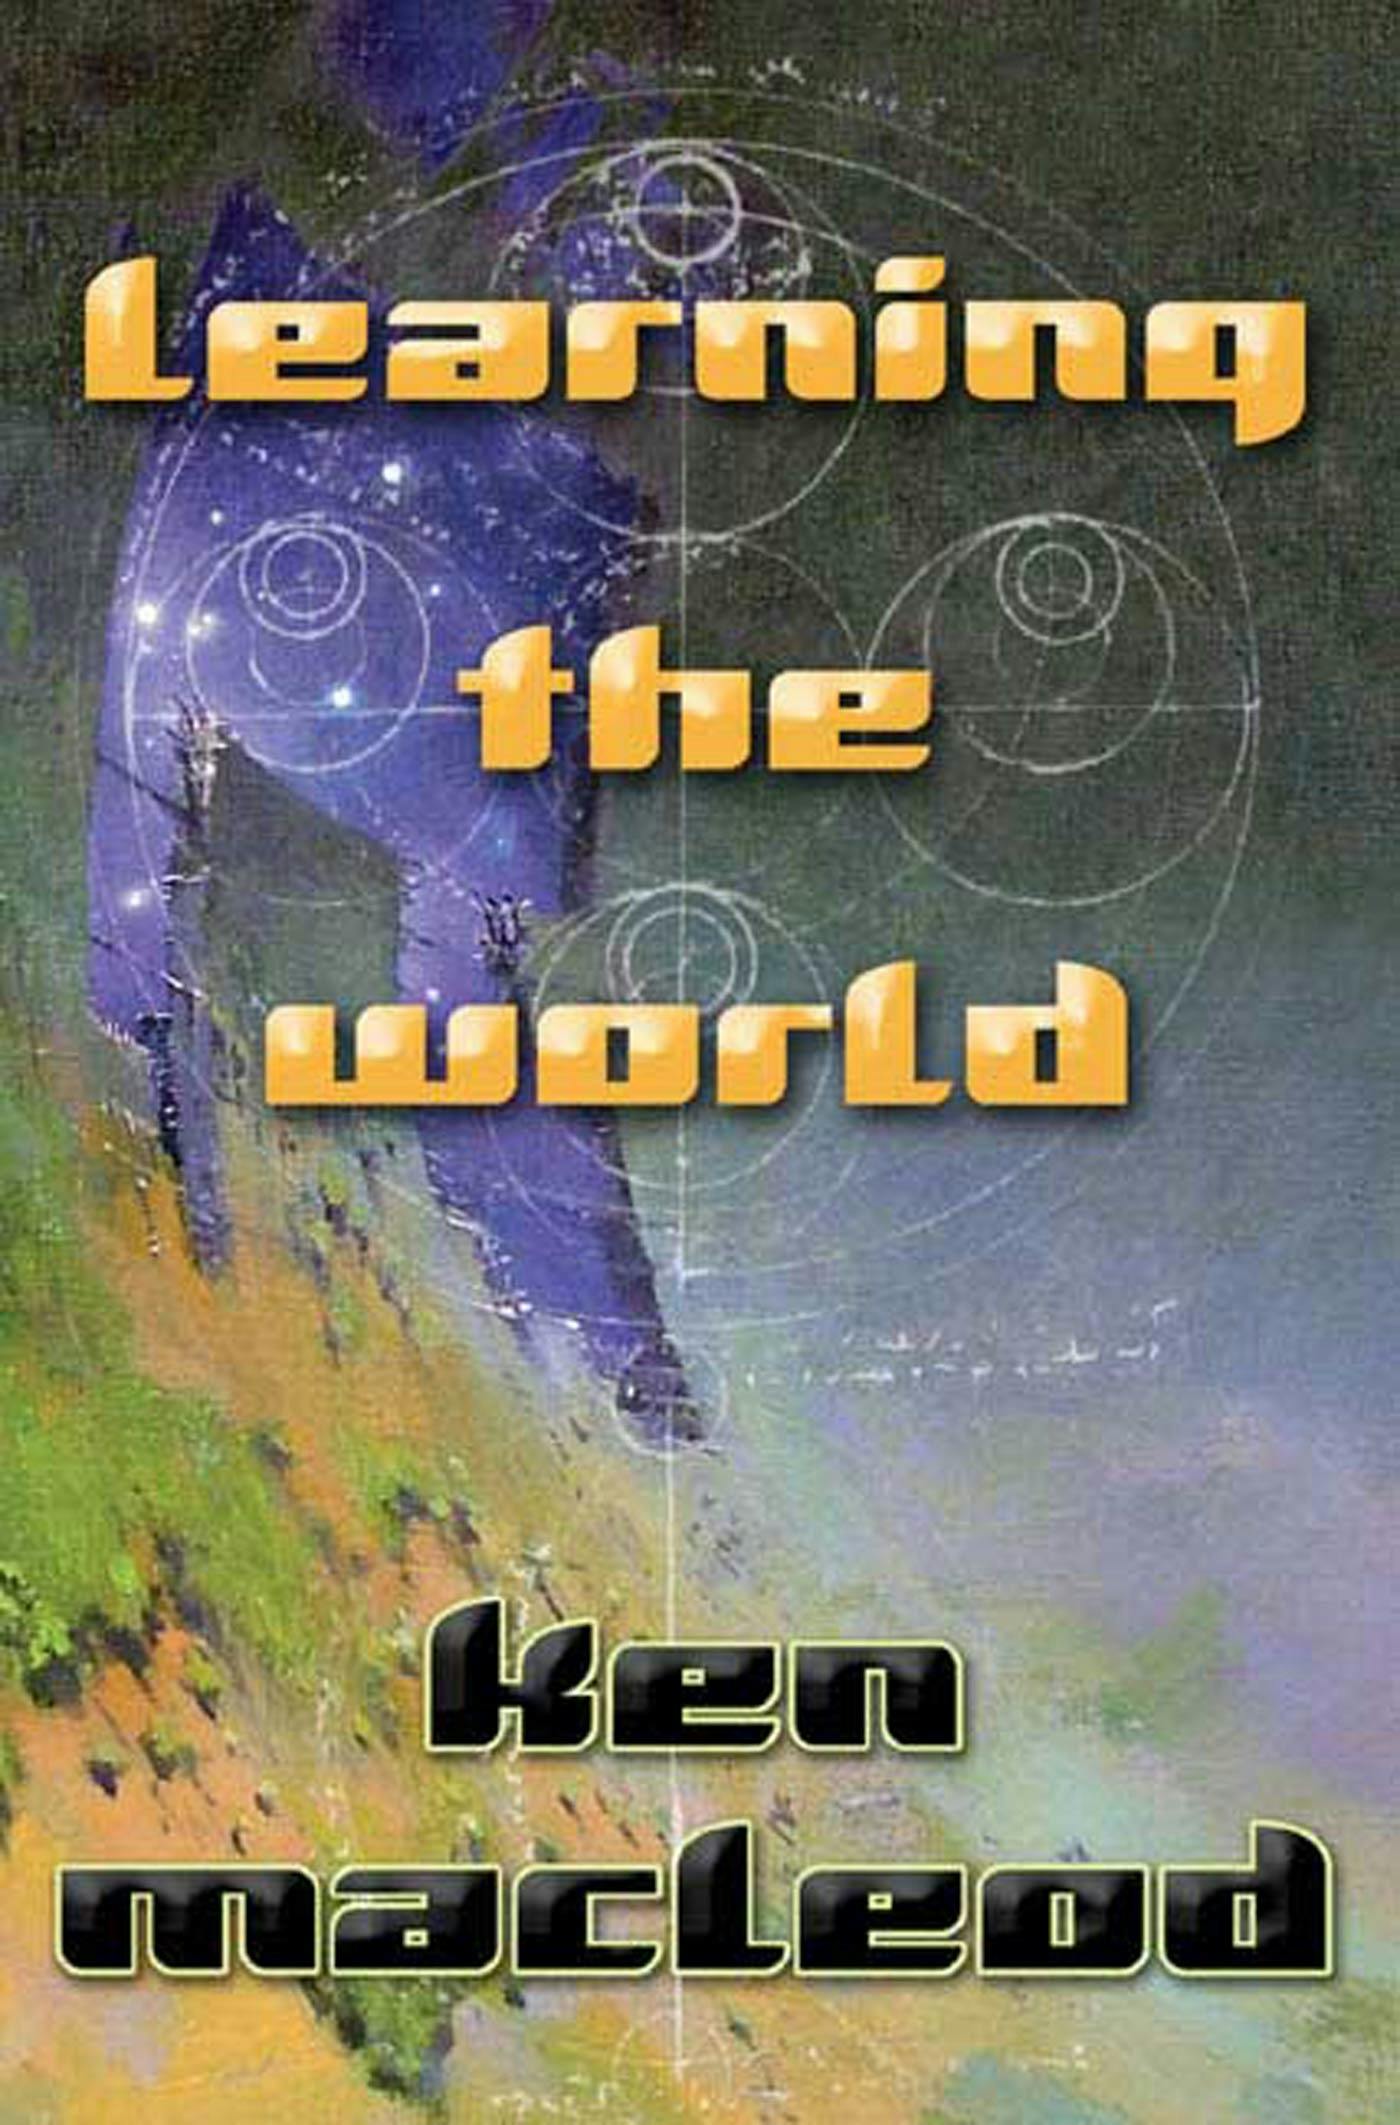 Cover for the book titled as: Learning the World